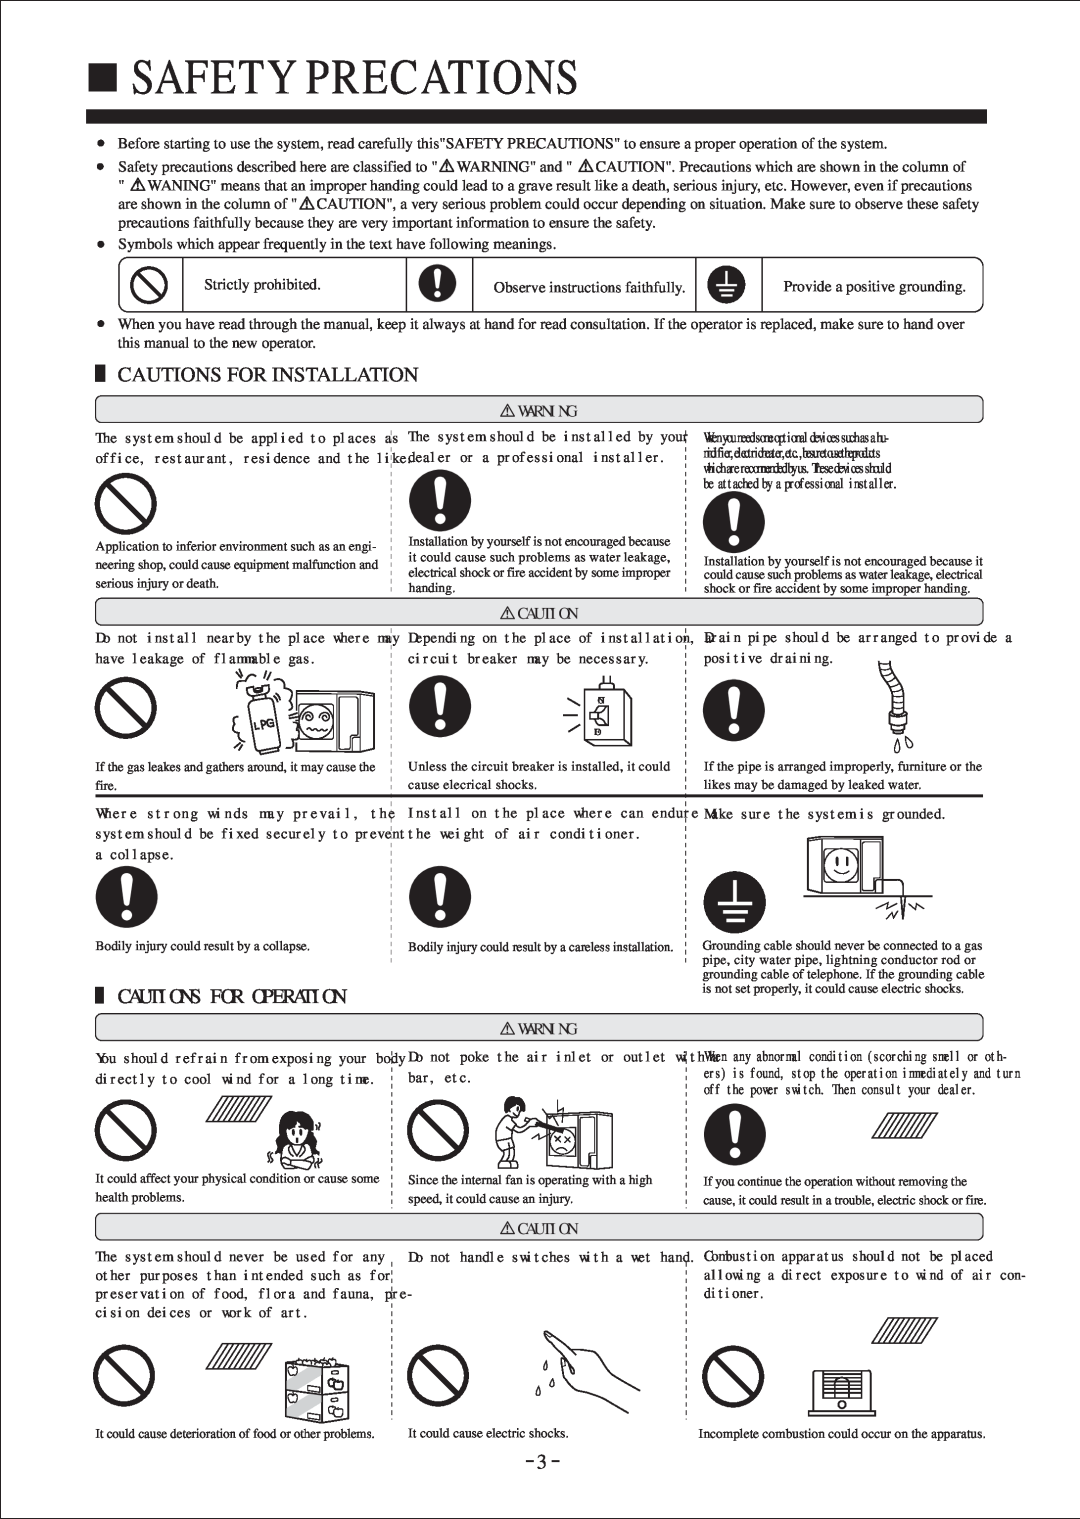 Haier HDU-42H03/H, HDU-24H03/H, HDU-28H03/H instruction manual Safety Precations, Cautions For Installation 